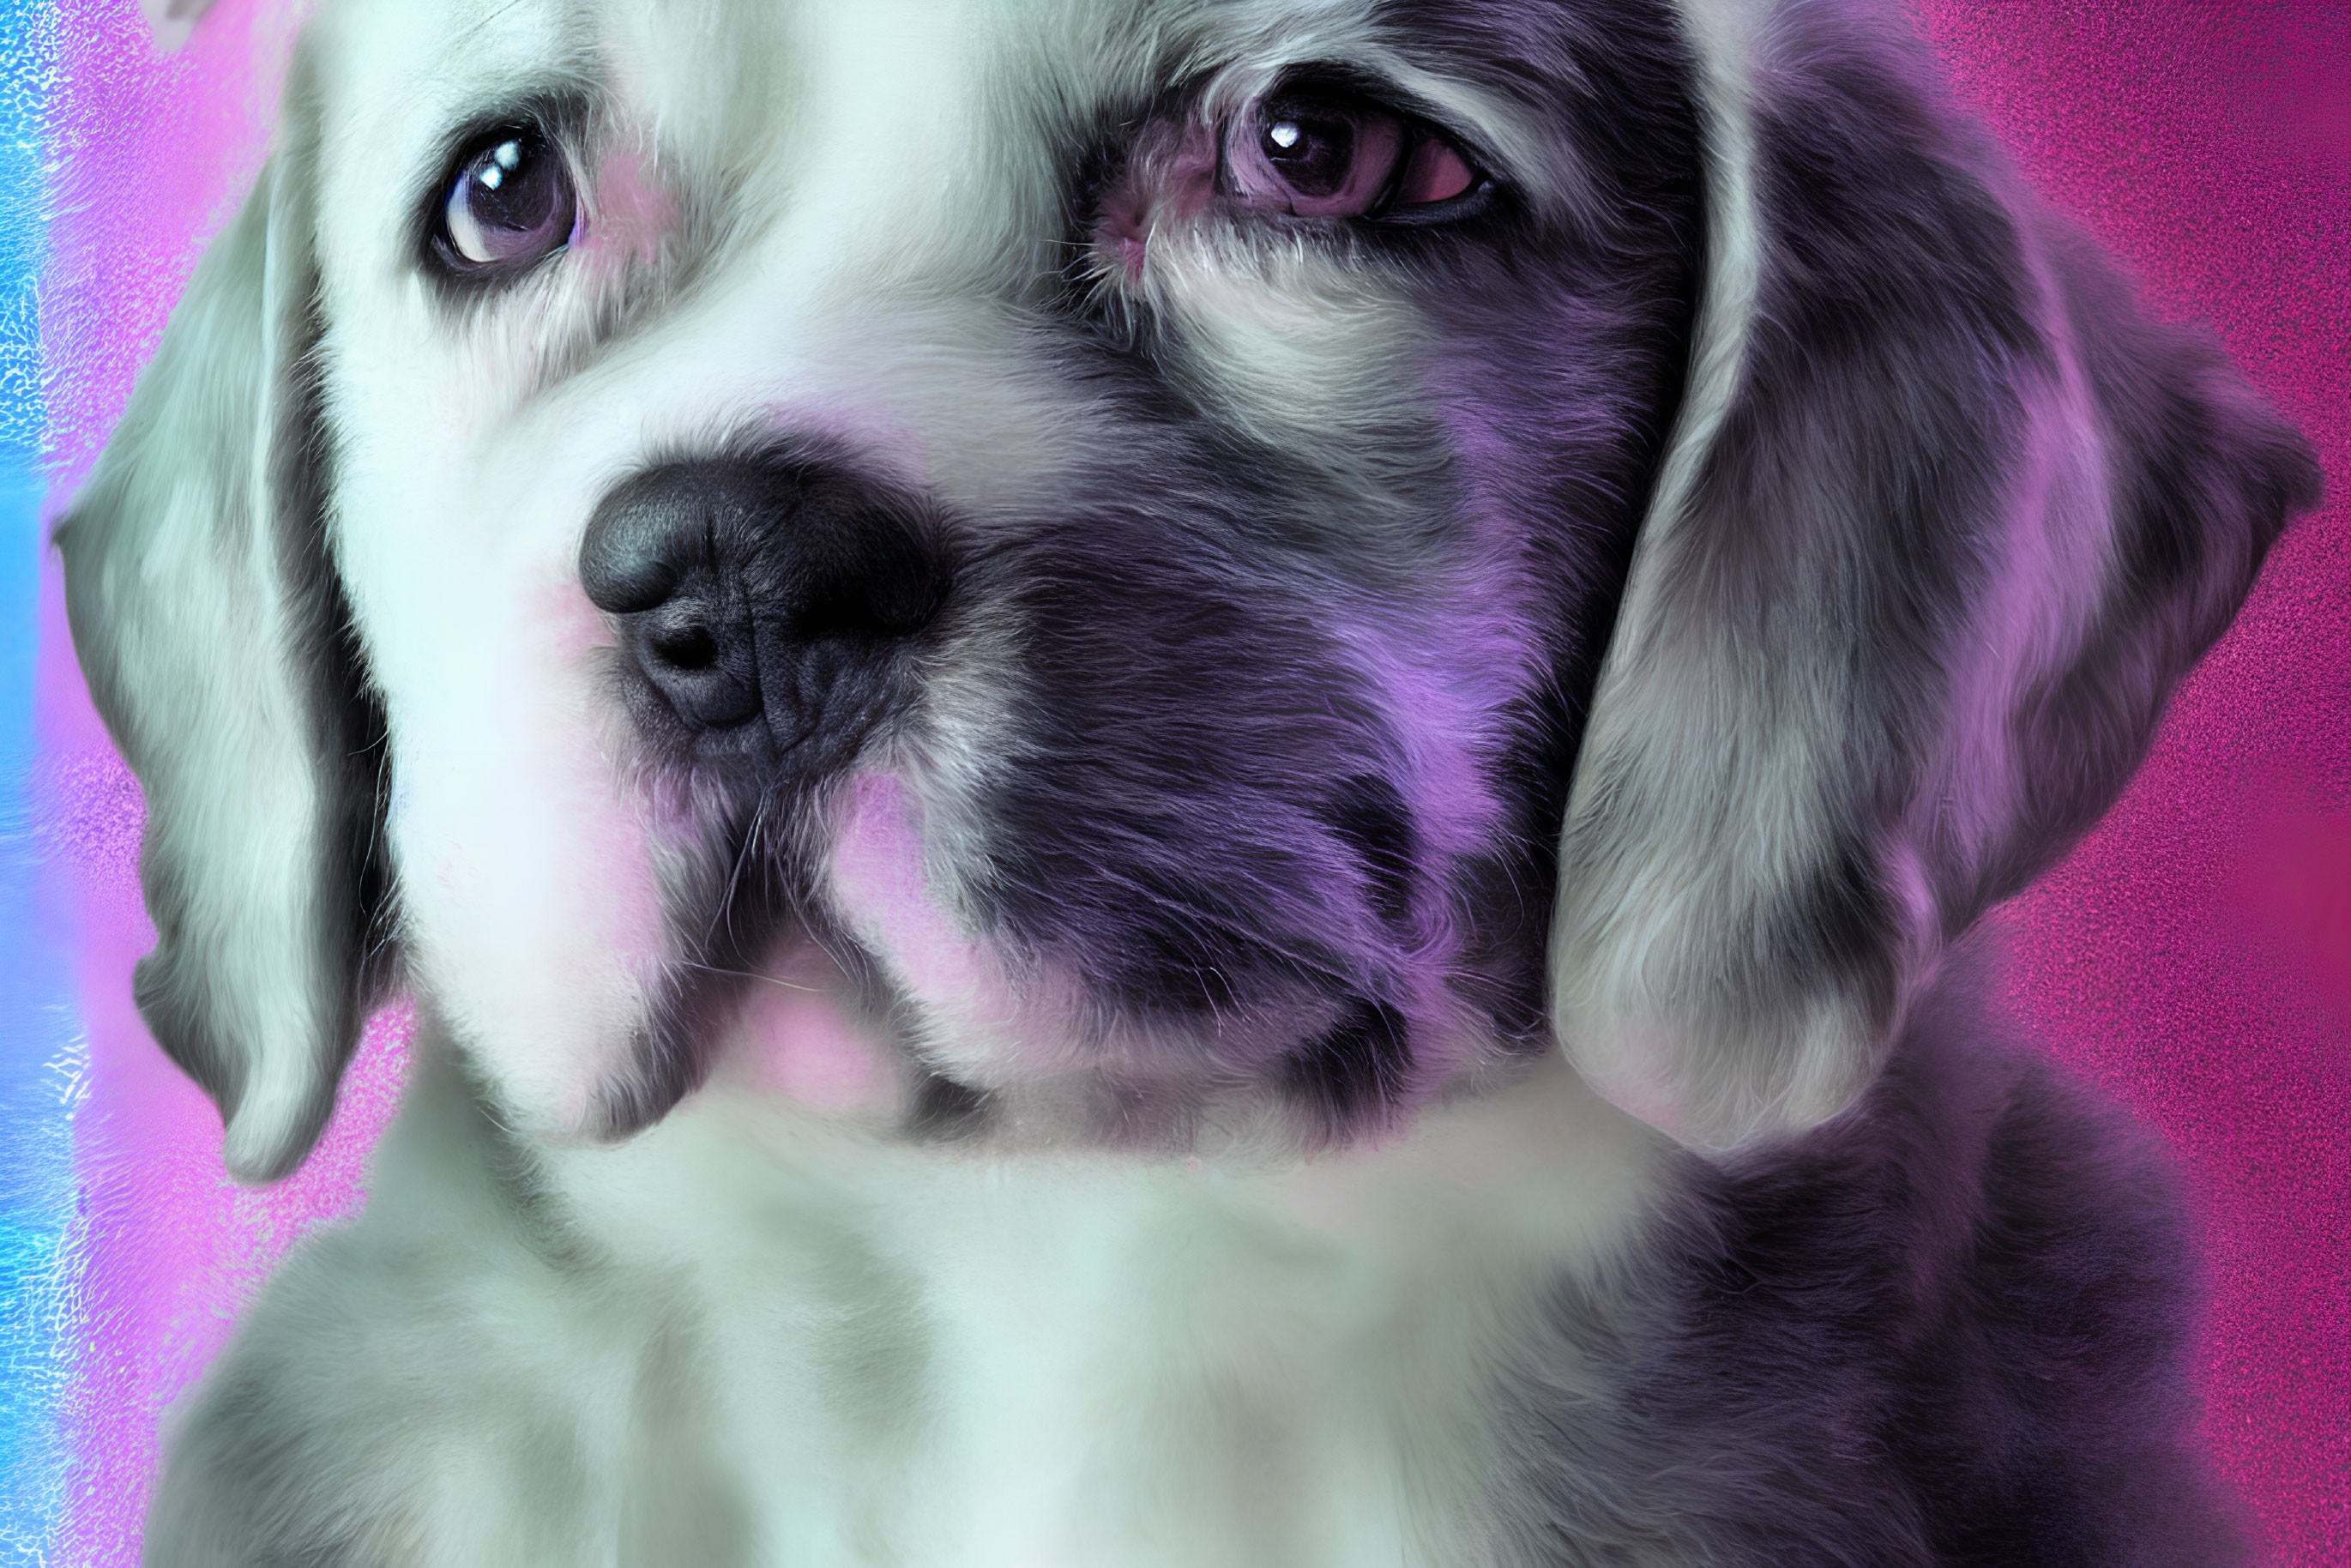 Adorable Puppy with Expressive Eyes on Neon Background